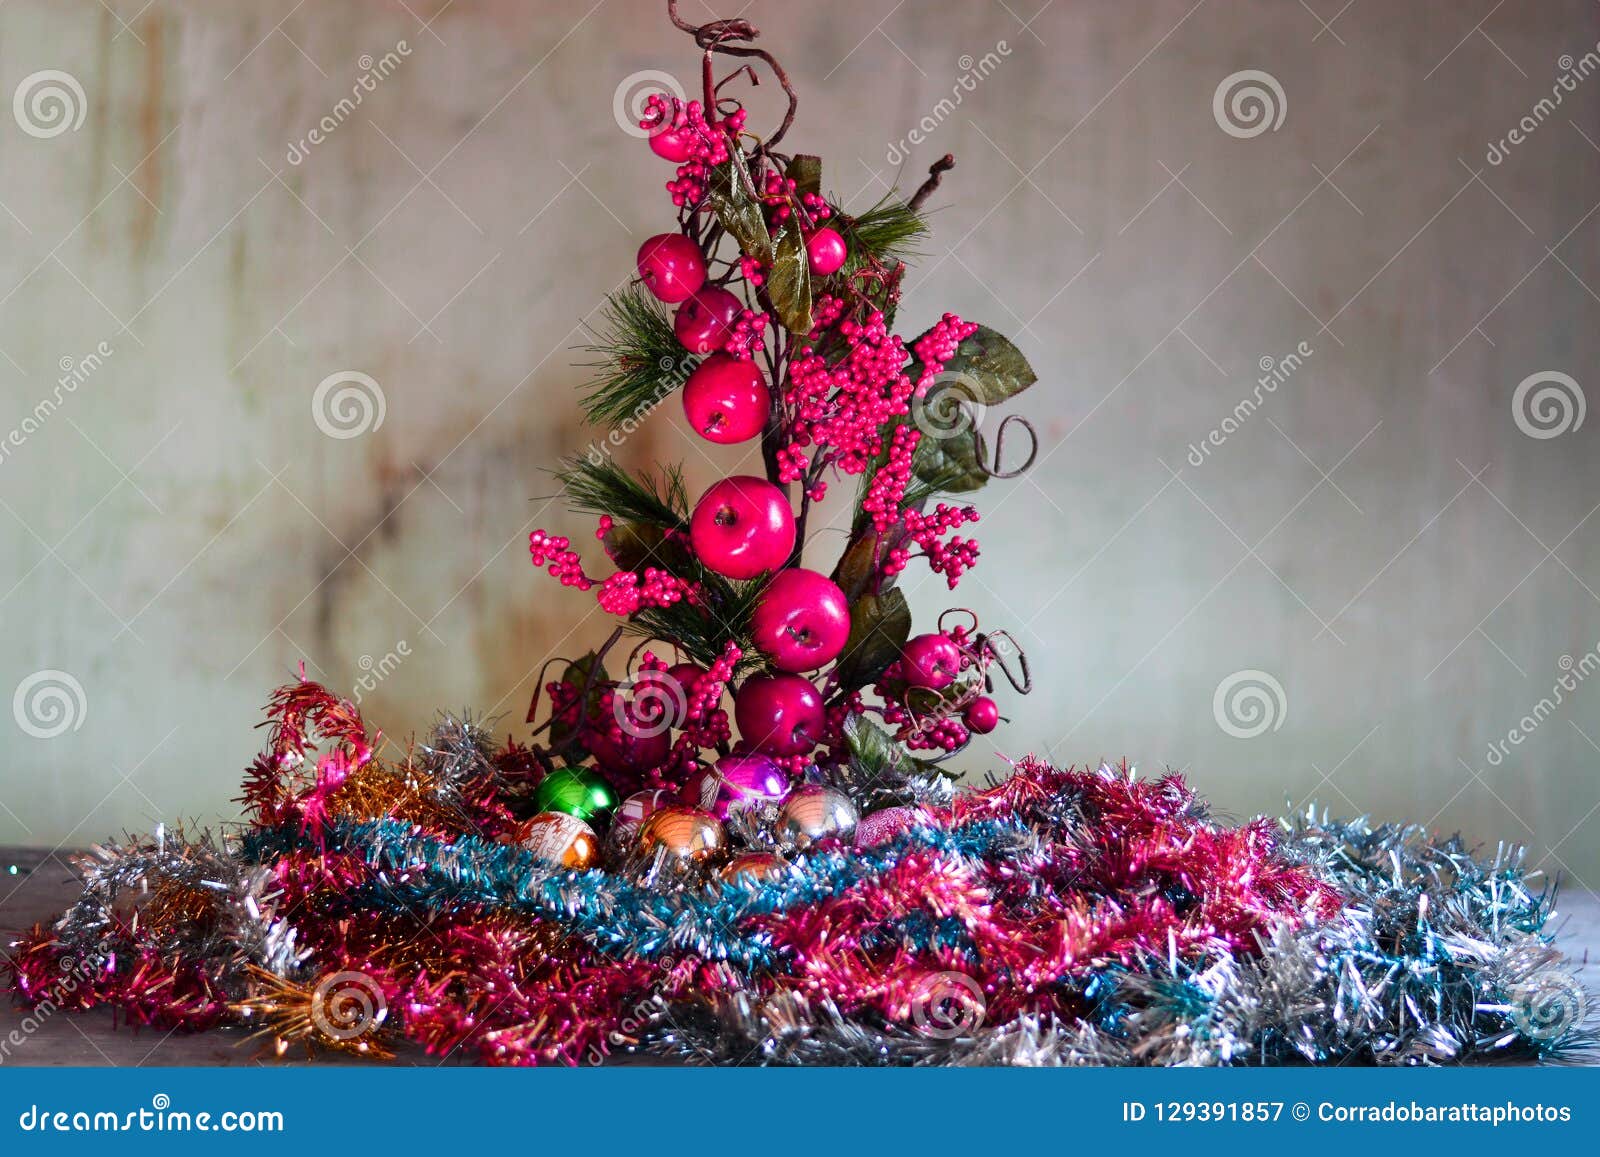 An Unusual Christmas Tree With Apples Stock Image Image Of